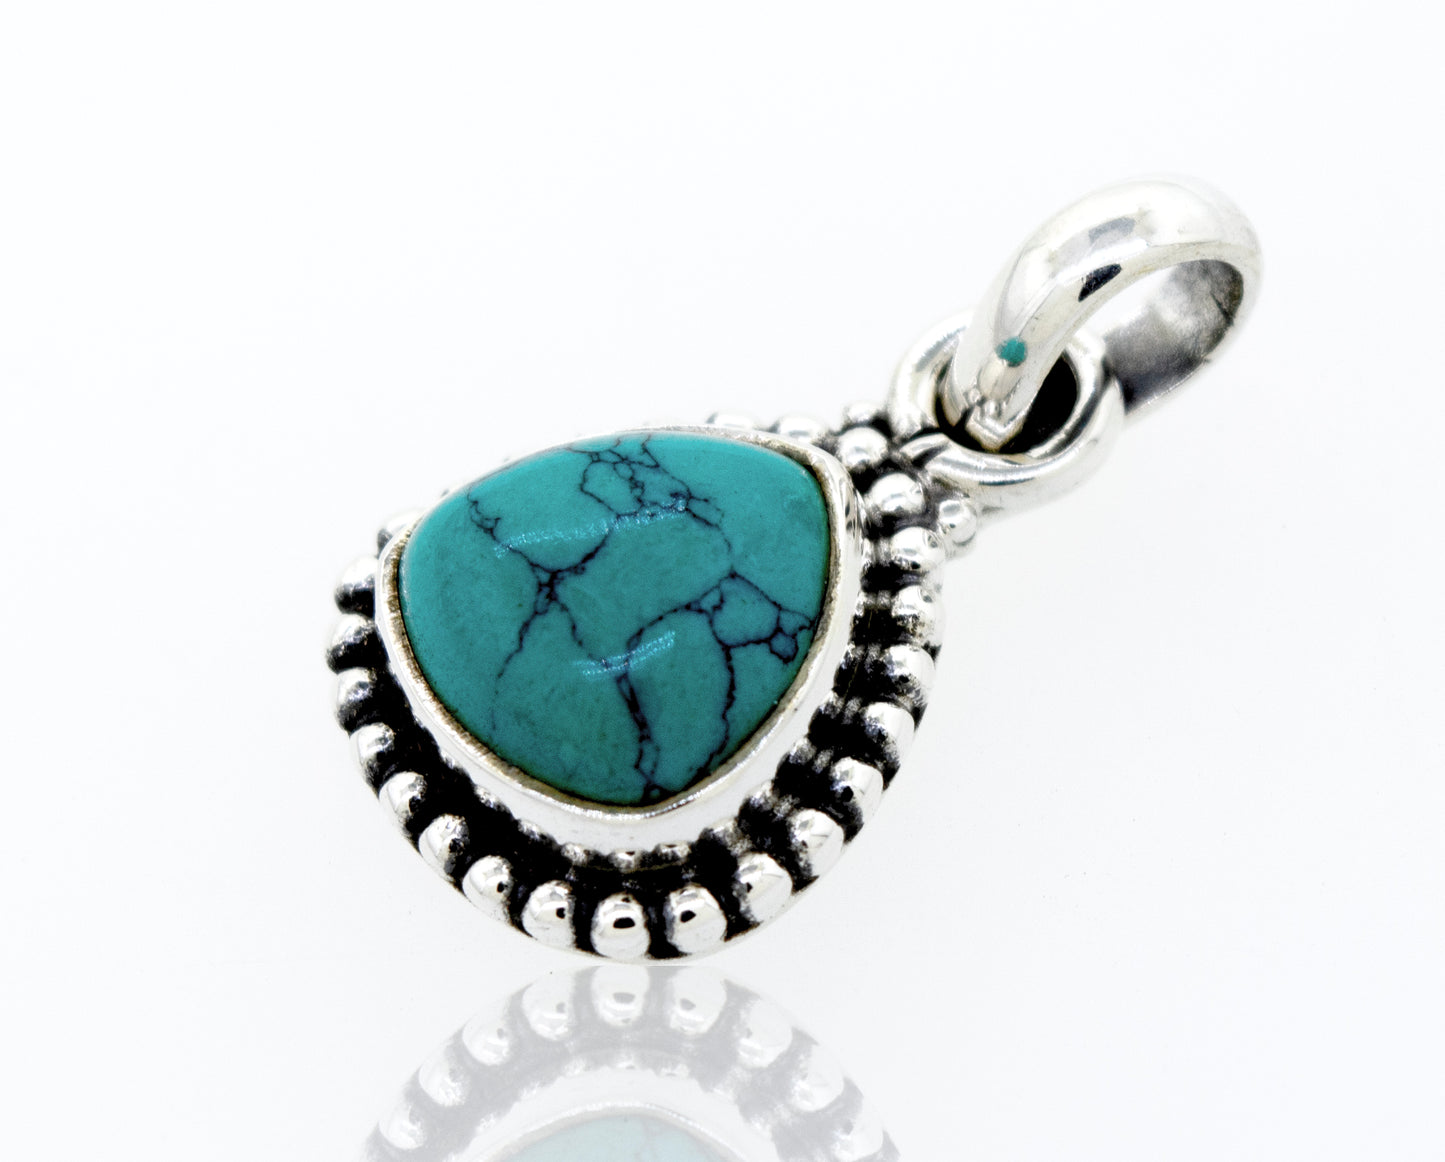 A Super Silver Beautiful Triangular Shape Turquoise Pendant With Beads Design.